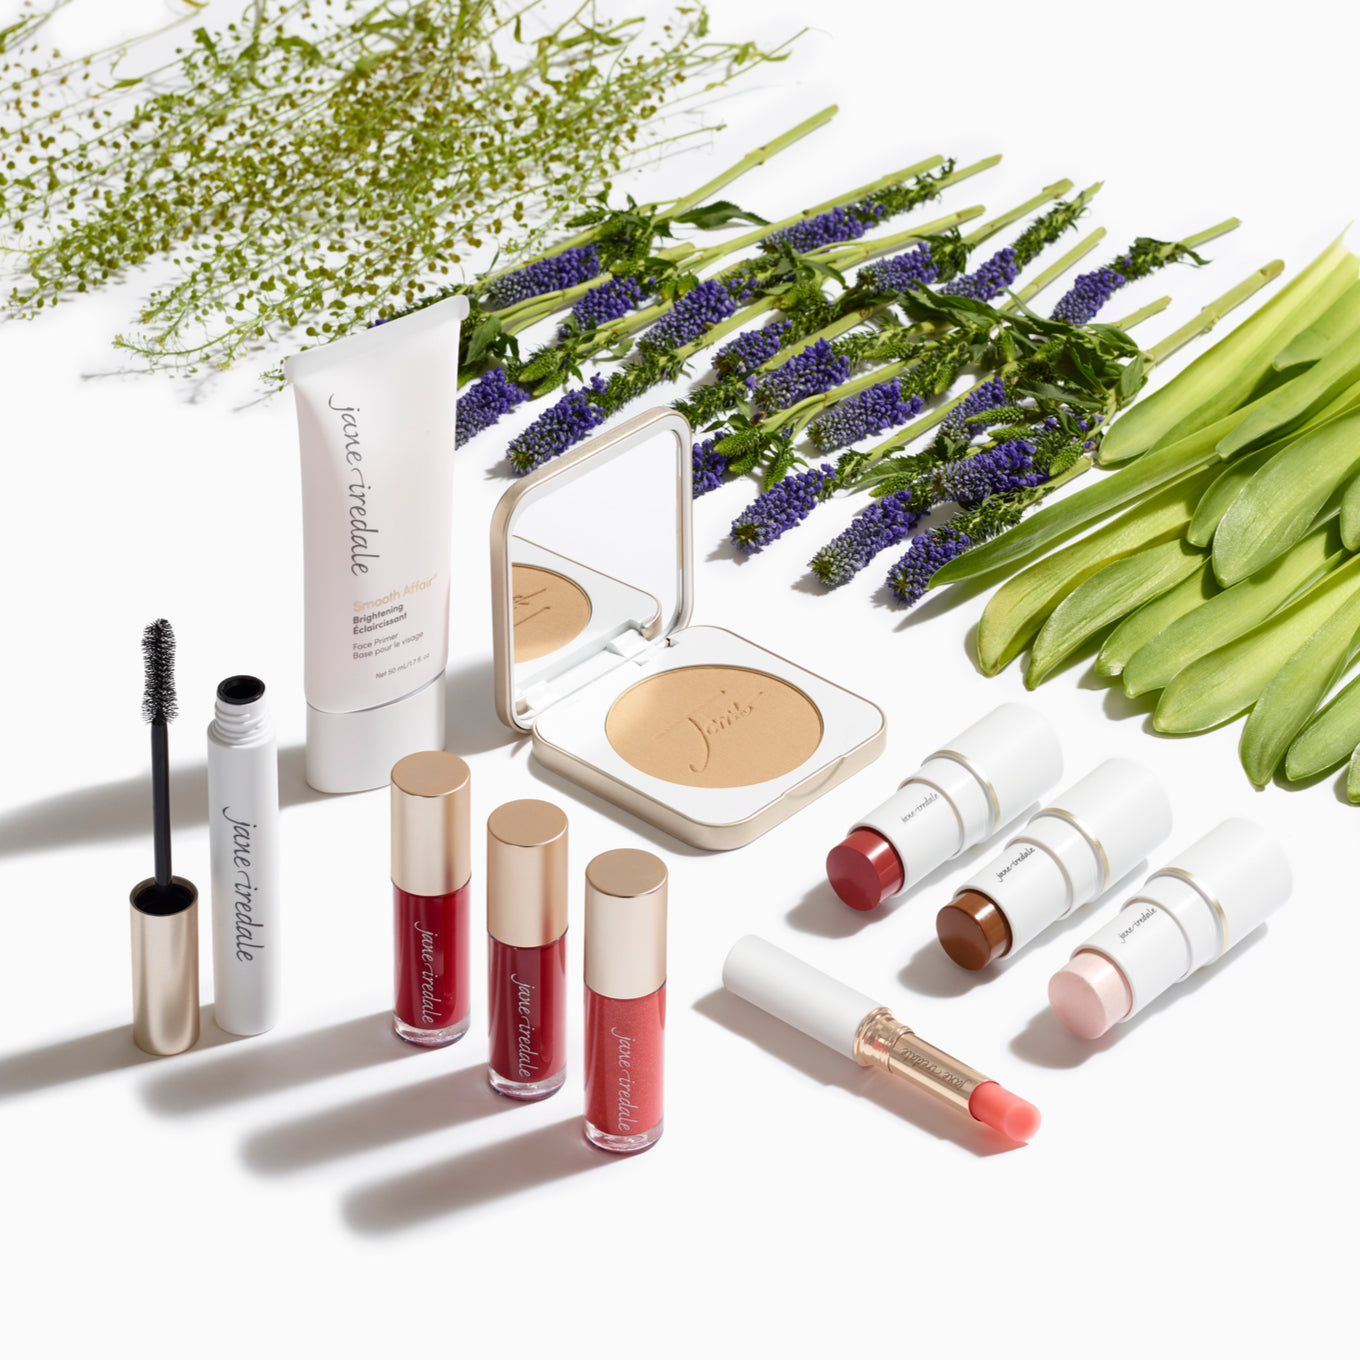 Several jane iredale products artistically arranged on a white background with some flowers and leaves lined up nearby